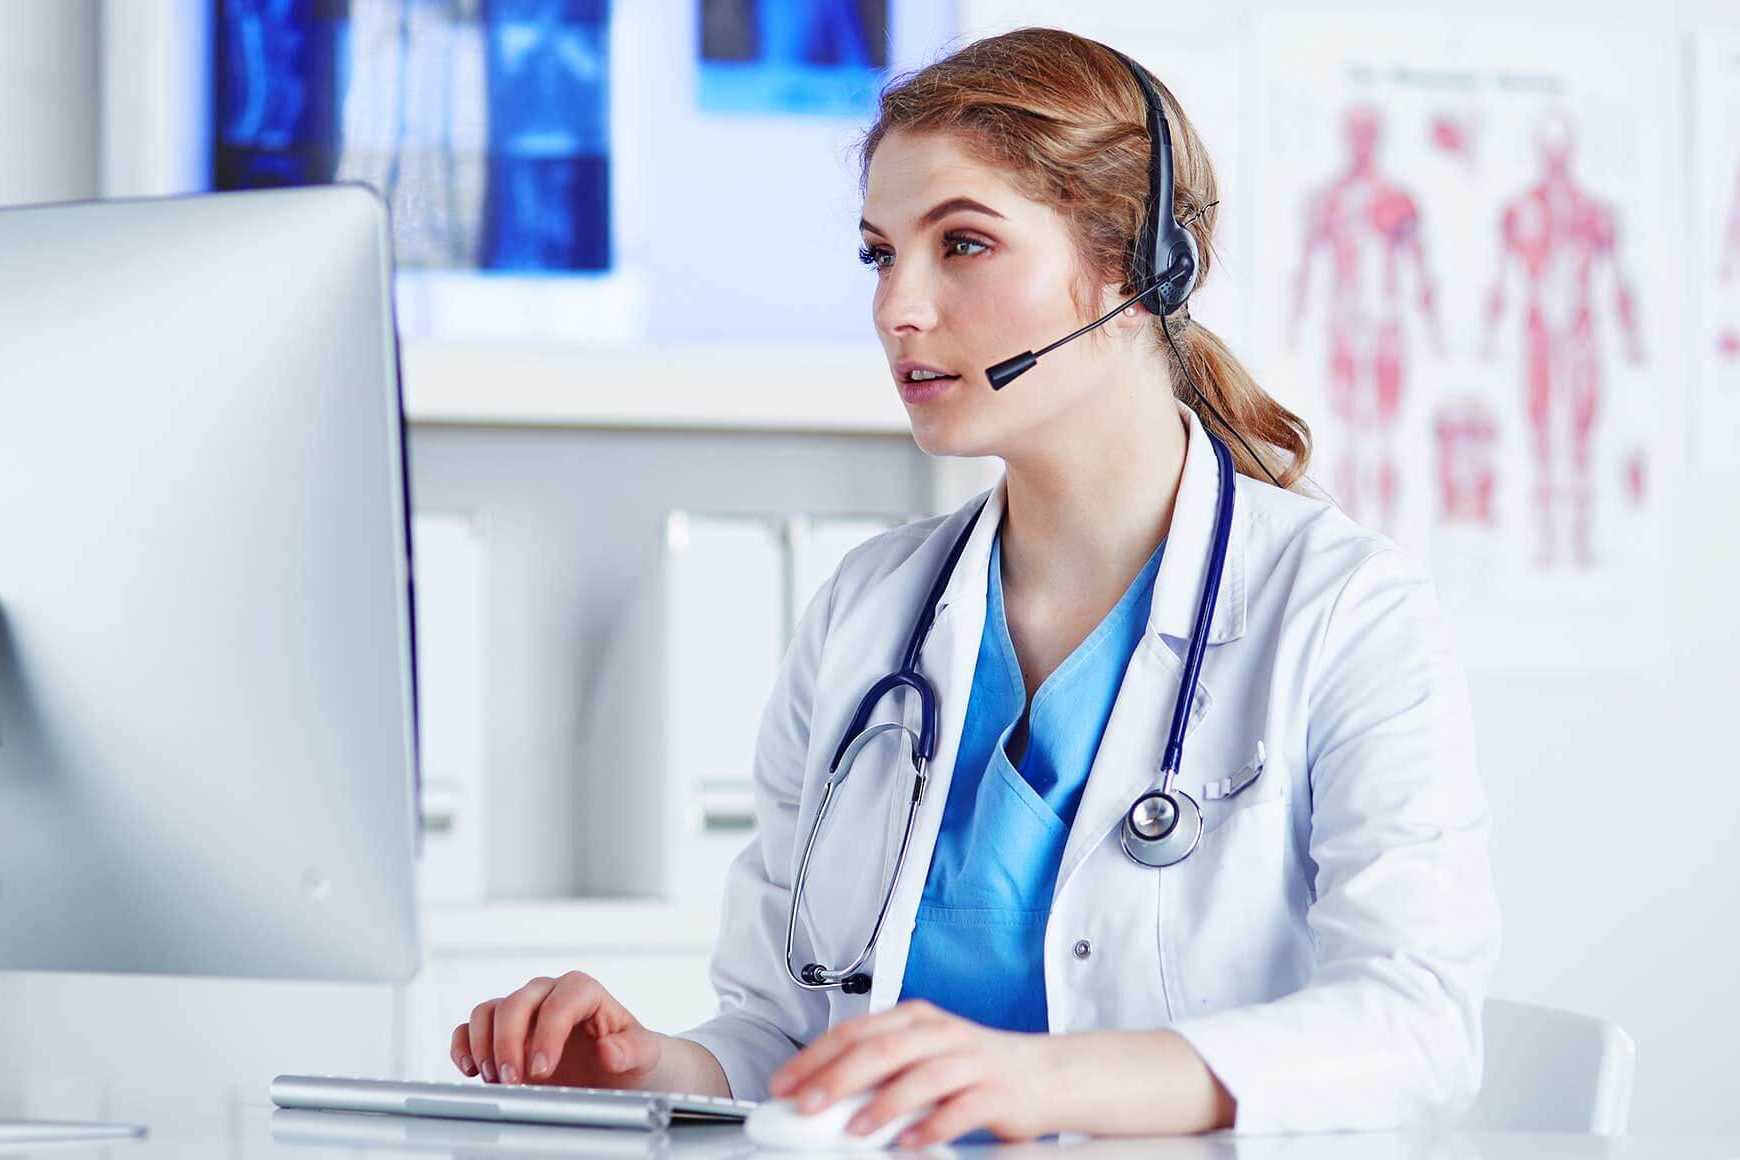 9 considerations for outsourcing your healthcare call center